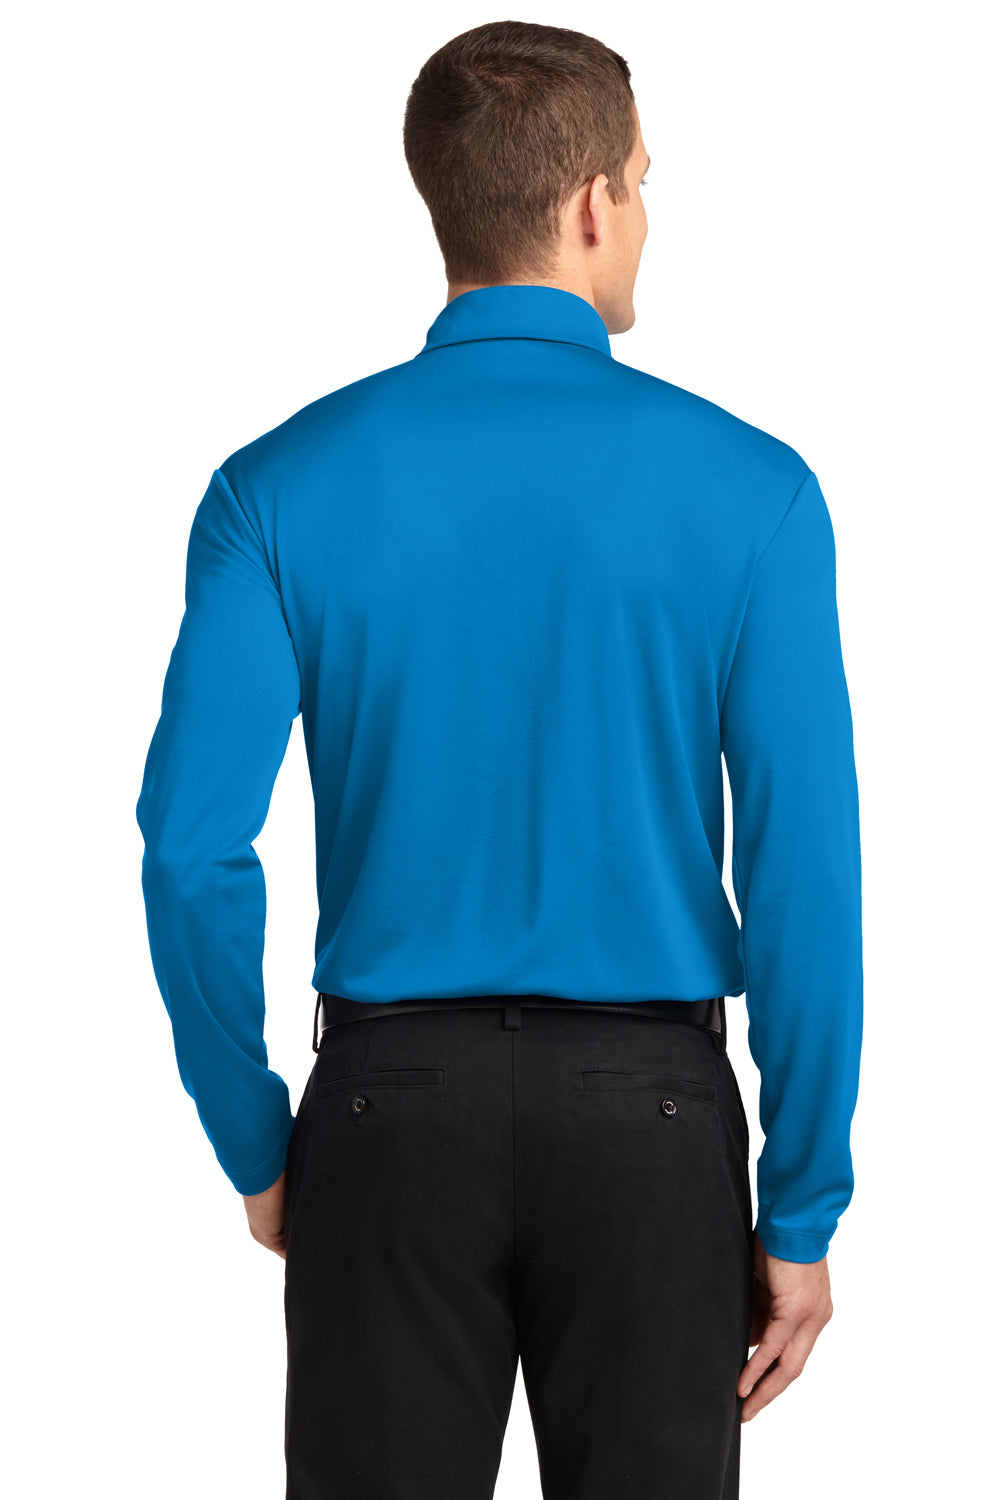 Port Authority K540LS Mens Silk Touch Performance Moisture Wicking Long Sleeve Polo Shirt Brilliant Blue Back